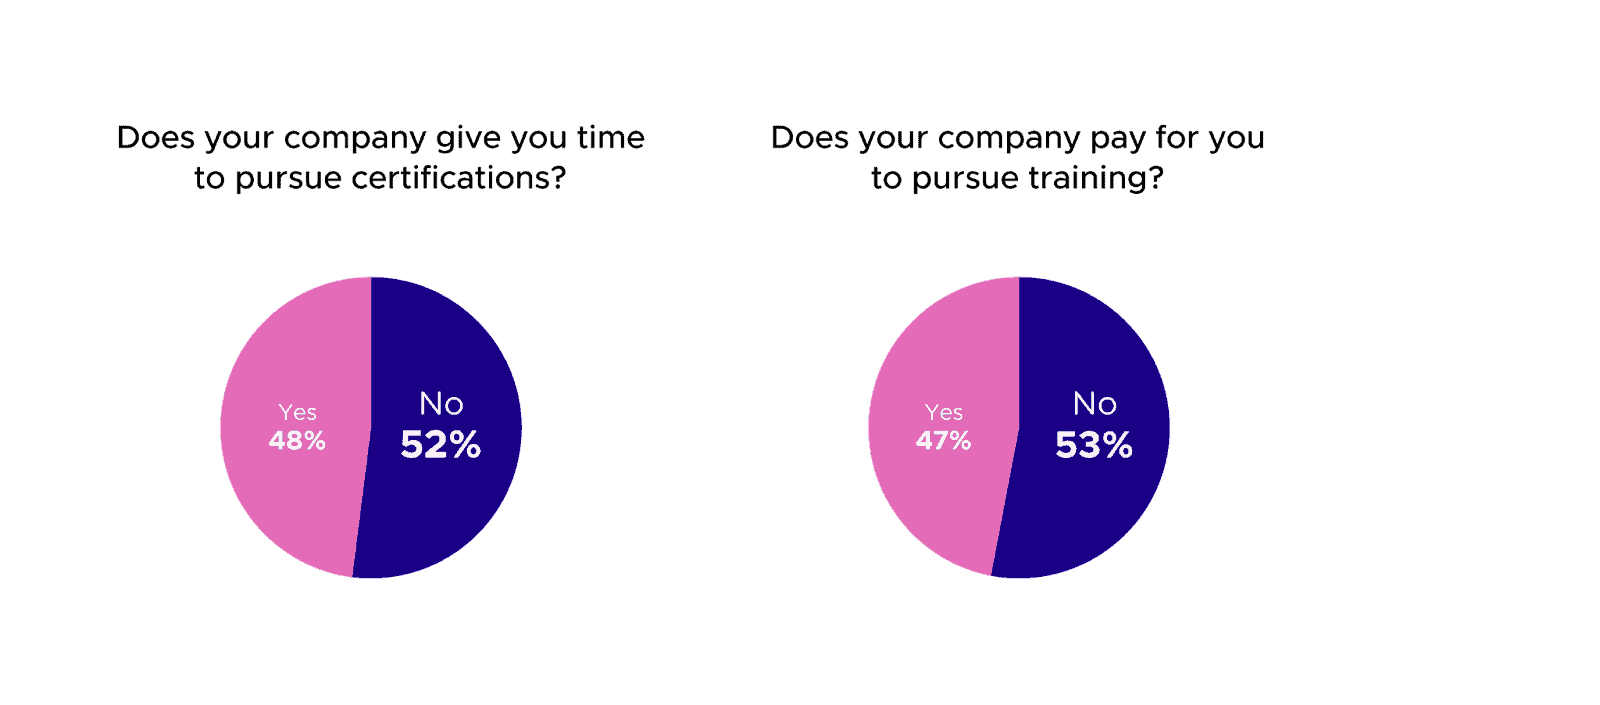 Round chart showing respondent's respond towards company giving respondents time or money to pursue certifications and training